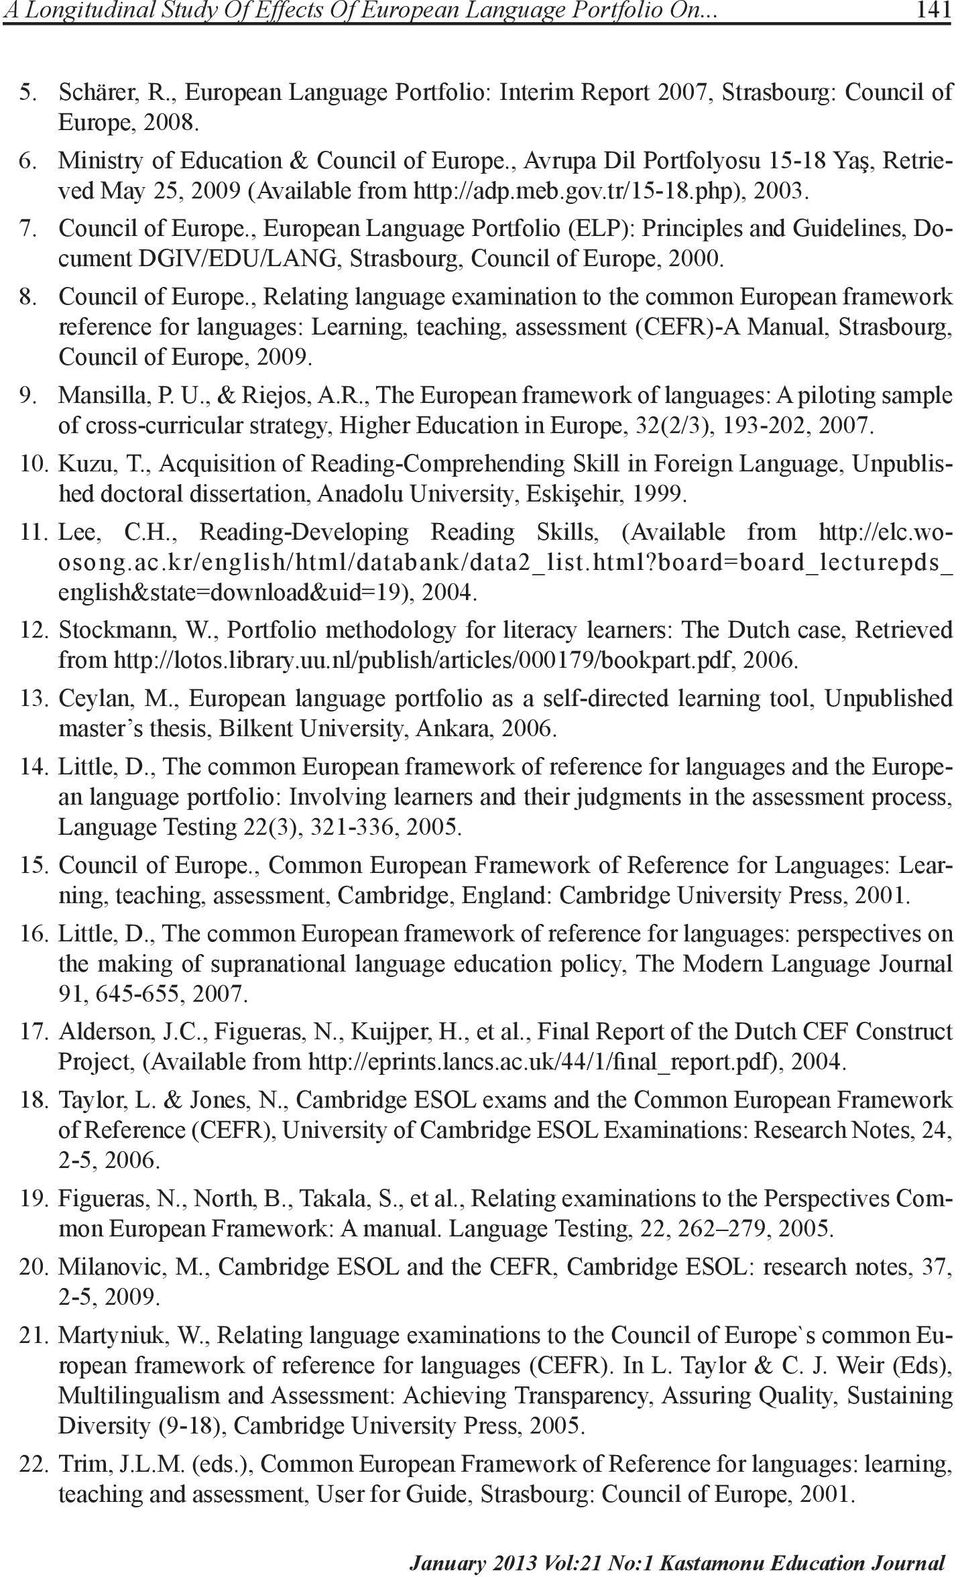 8. Council of Europe., Relating language examination to the common European framework reference for languages: Learning, teaching, assessment (CEFR)-A Manual, Strasbourg, Council of Europe, 2009. 9.